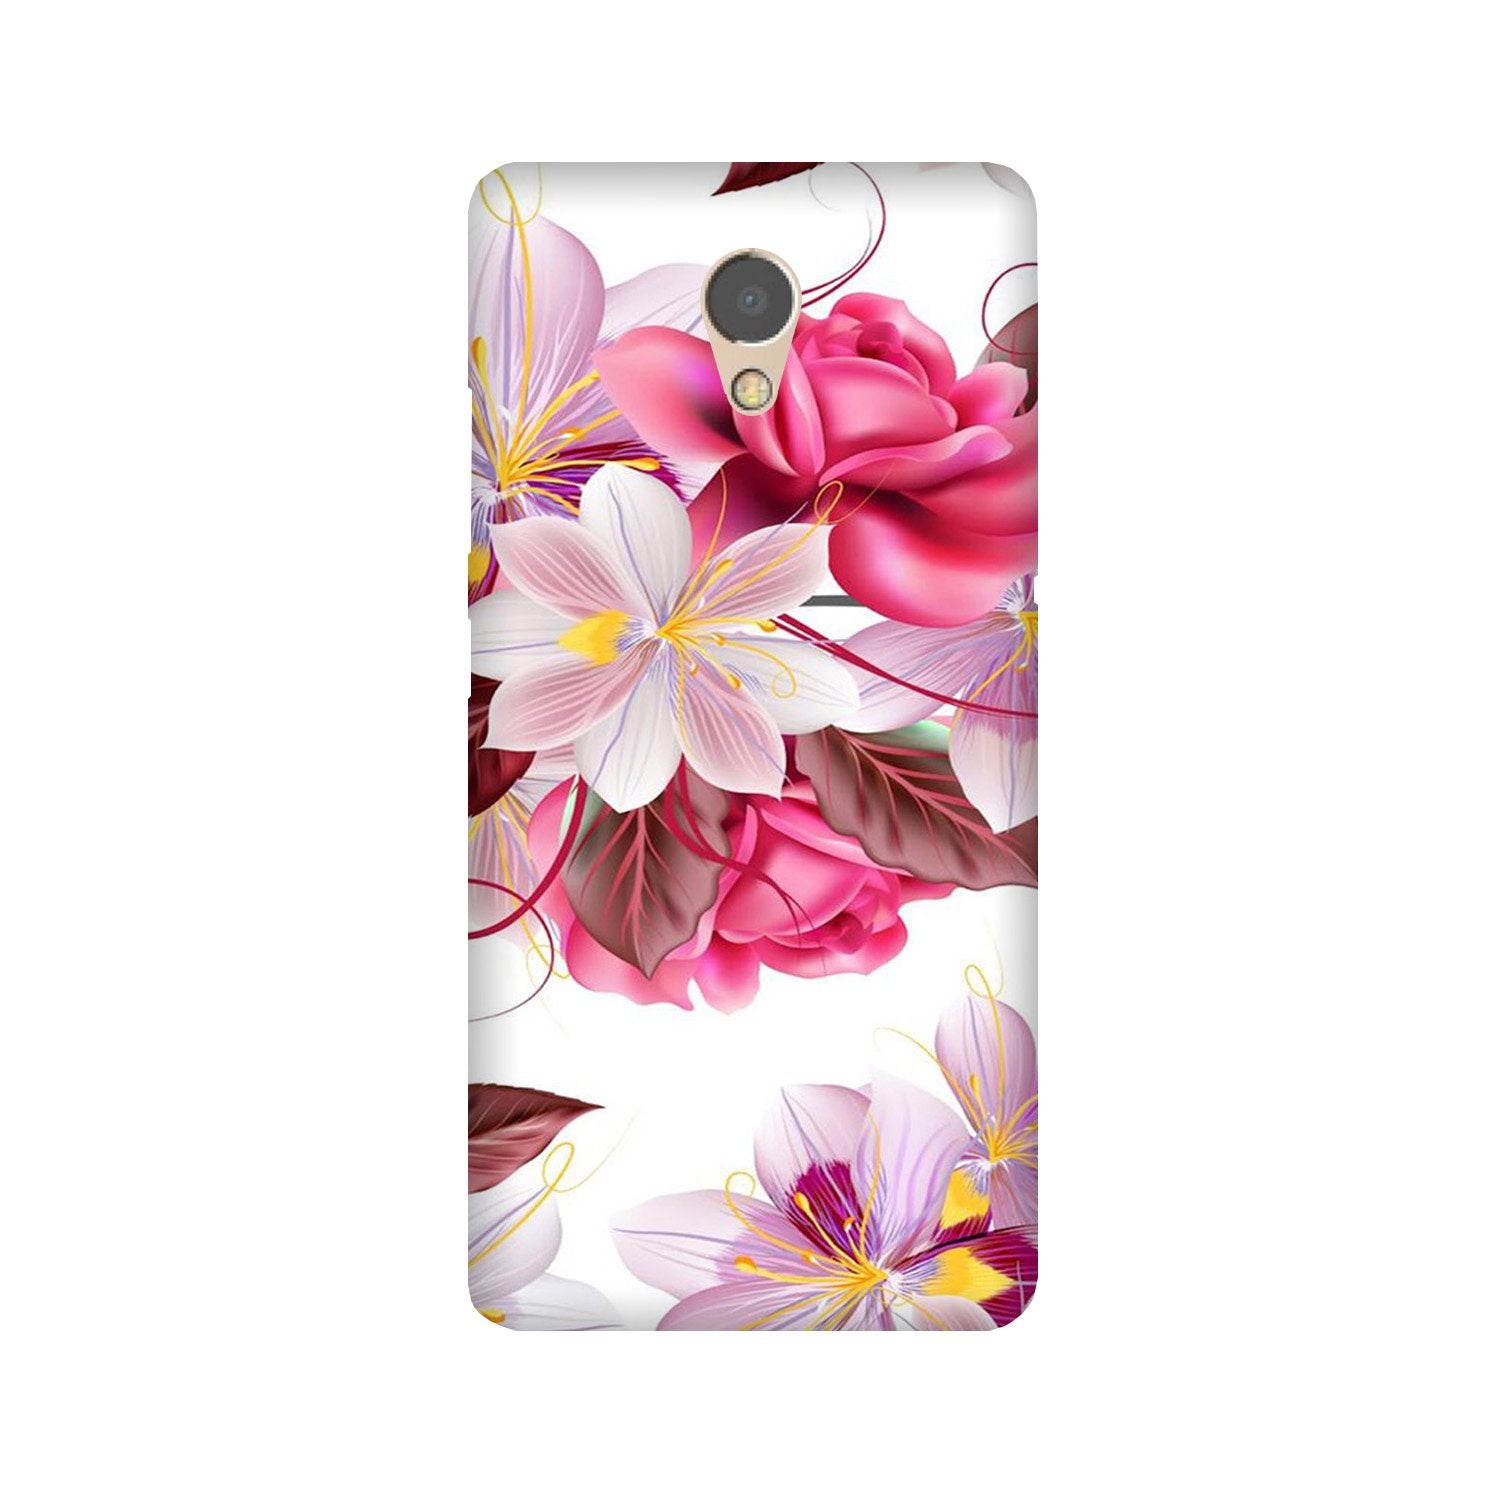 Beautiful flowers Case for Lenovo P2